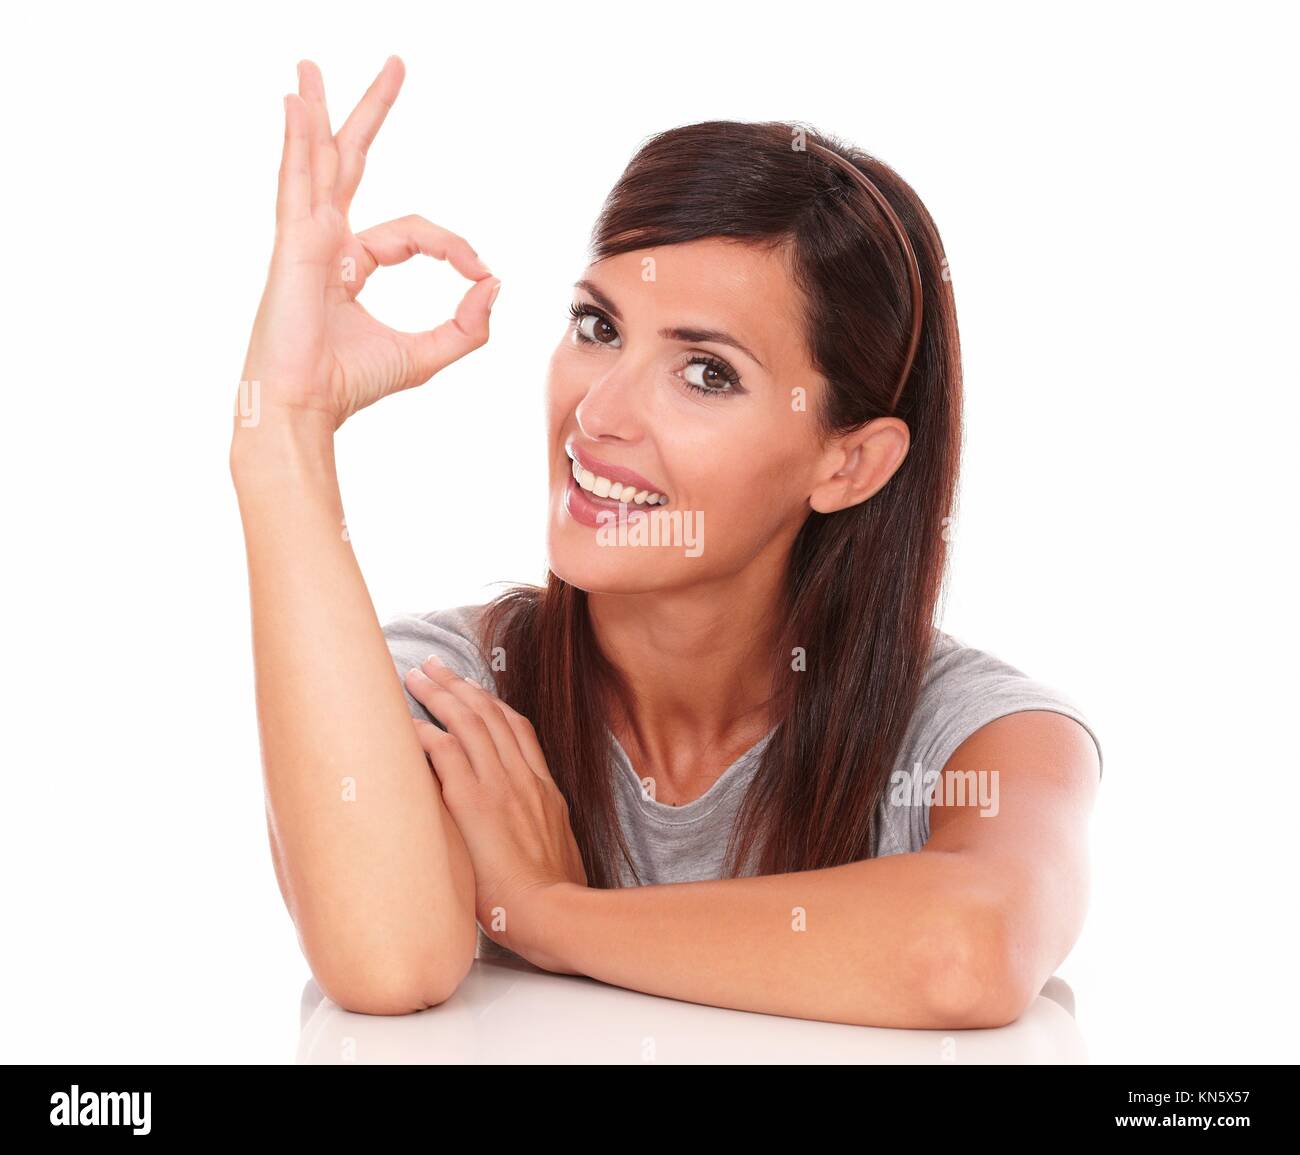 Headshot portrait of friendly girl with great job gesture smiling and looking at camera on isolated studio. Stock Photo